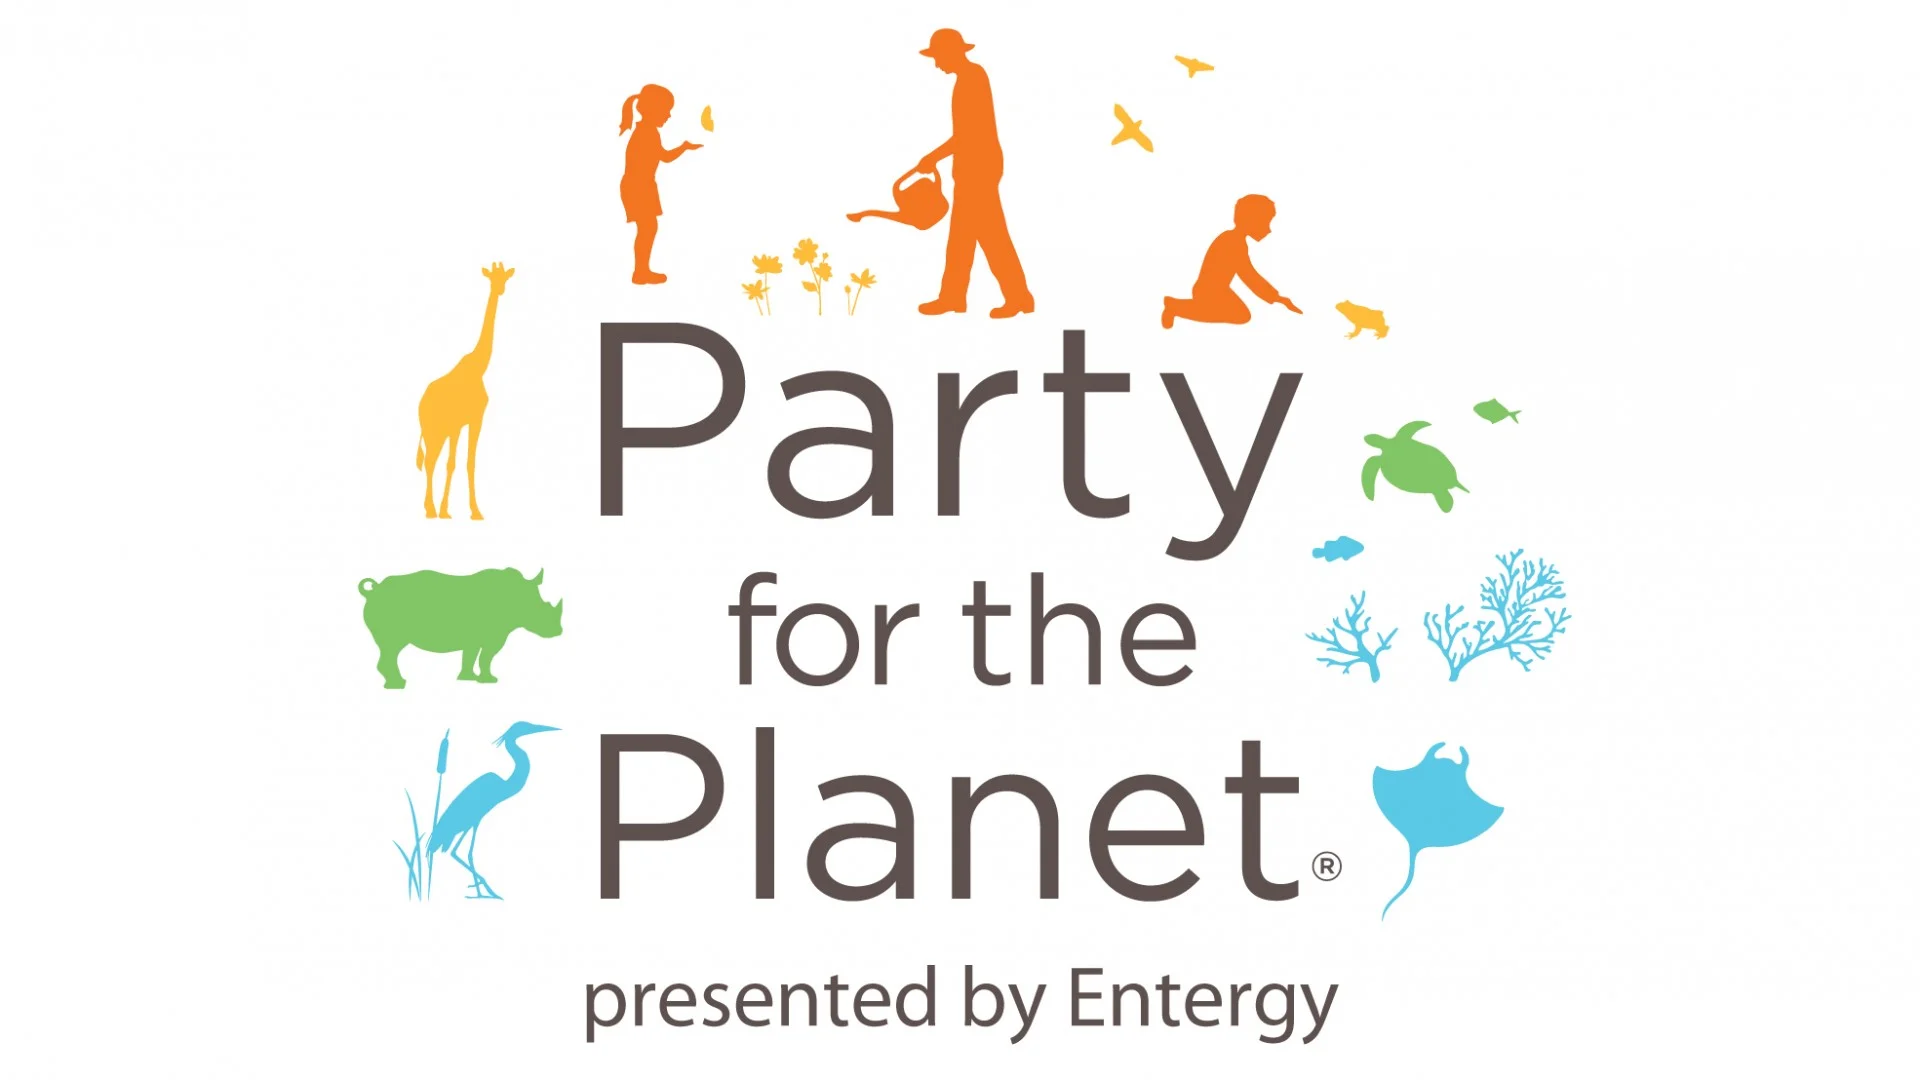 Audubon Zoo teams up with Entergy & NASA for 'Party for the Planet’